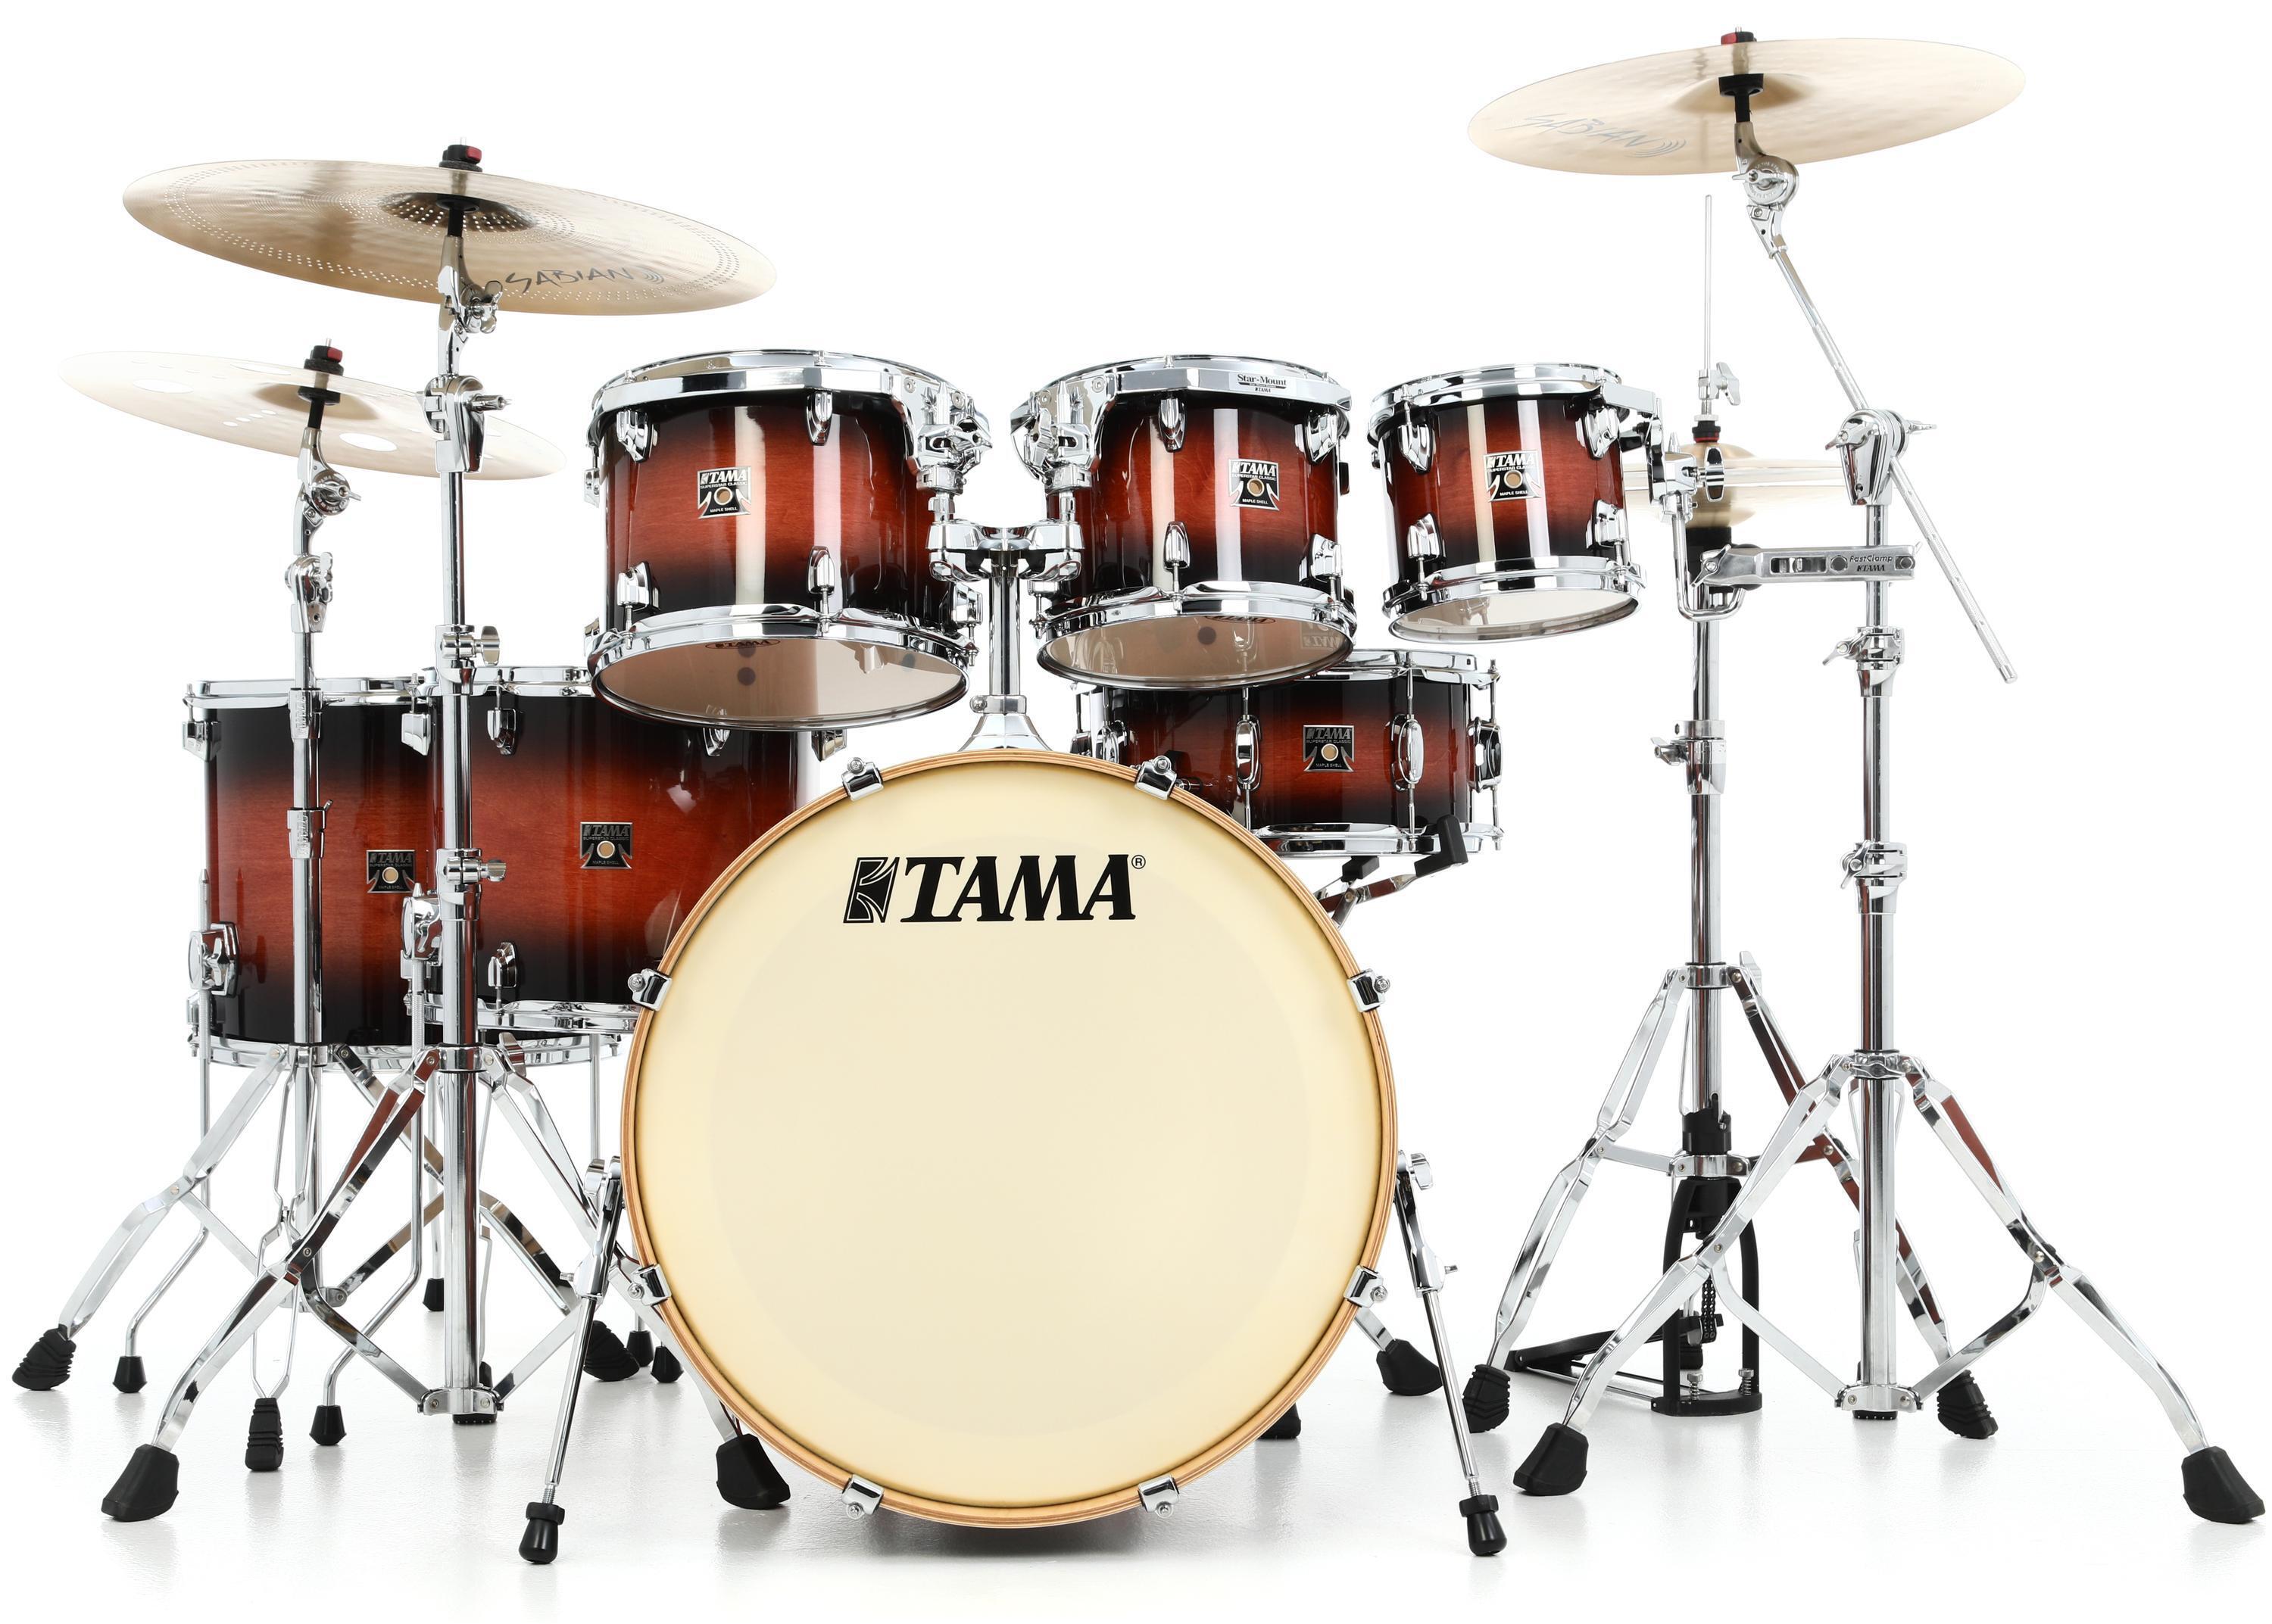 Tama Superstar Classic CL72S 7-piece Shell Pack with Snare Drum - Mahogany  Burst Lacquer